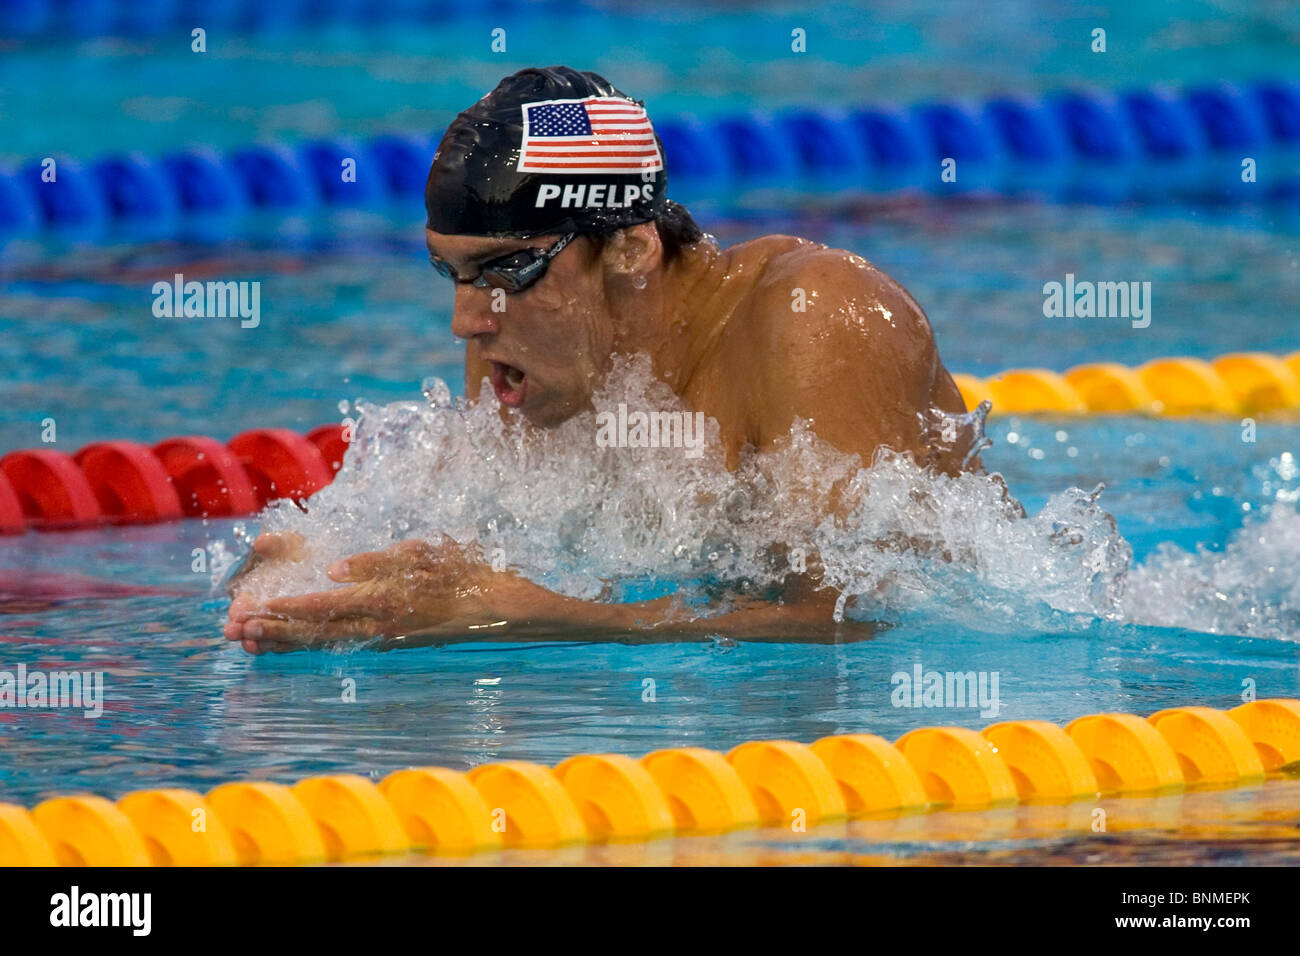 Michael Phelps (USA) in the breaststroke portion of the 400m IM at the 2004 Olympic Summer Games, Athens, Greece. Stock Photo